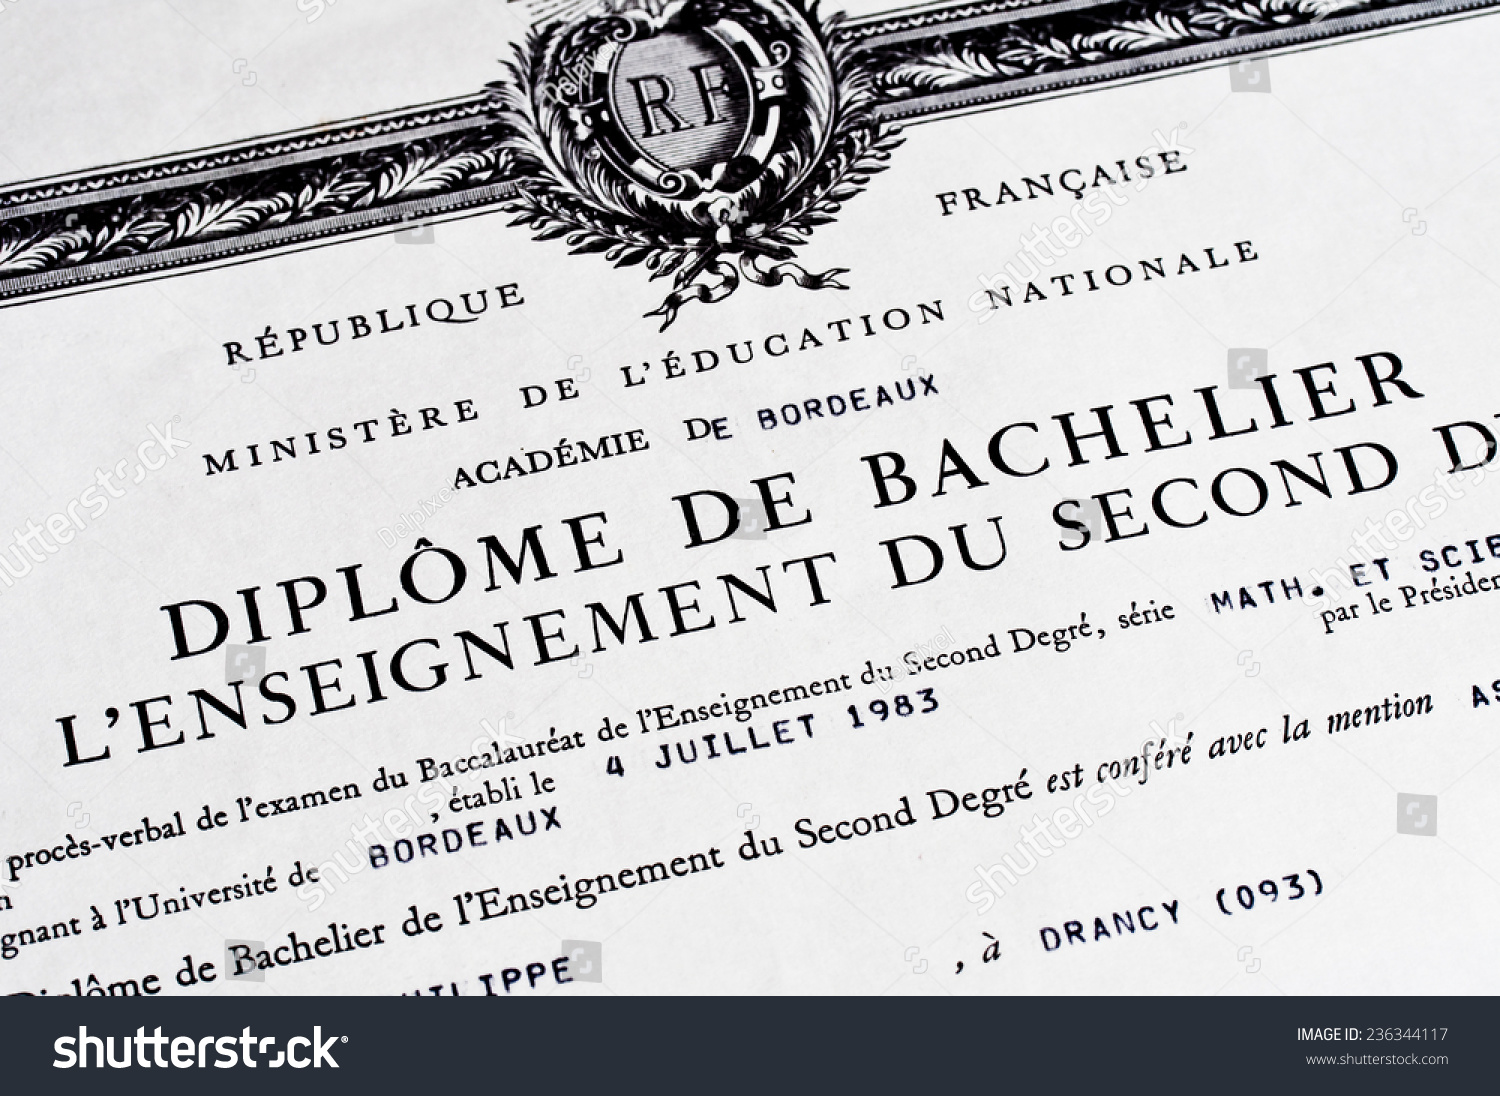 stock photo detail of french anonymous baccalaureat diploma diplome de bachelier baccalaureat diploma 236344117